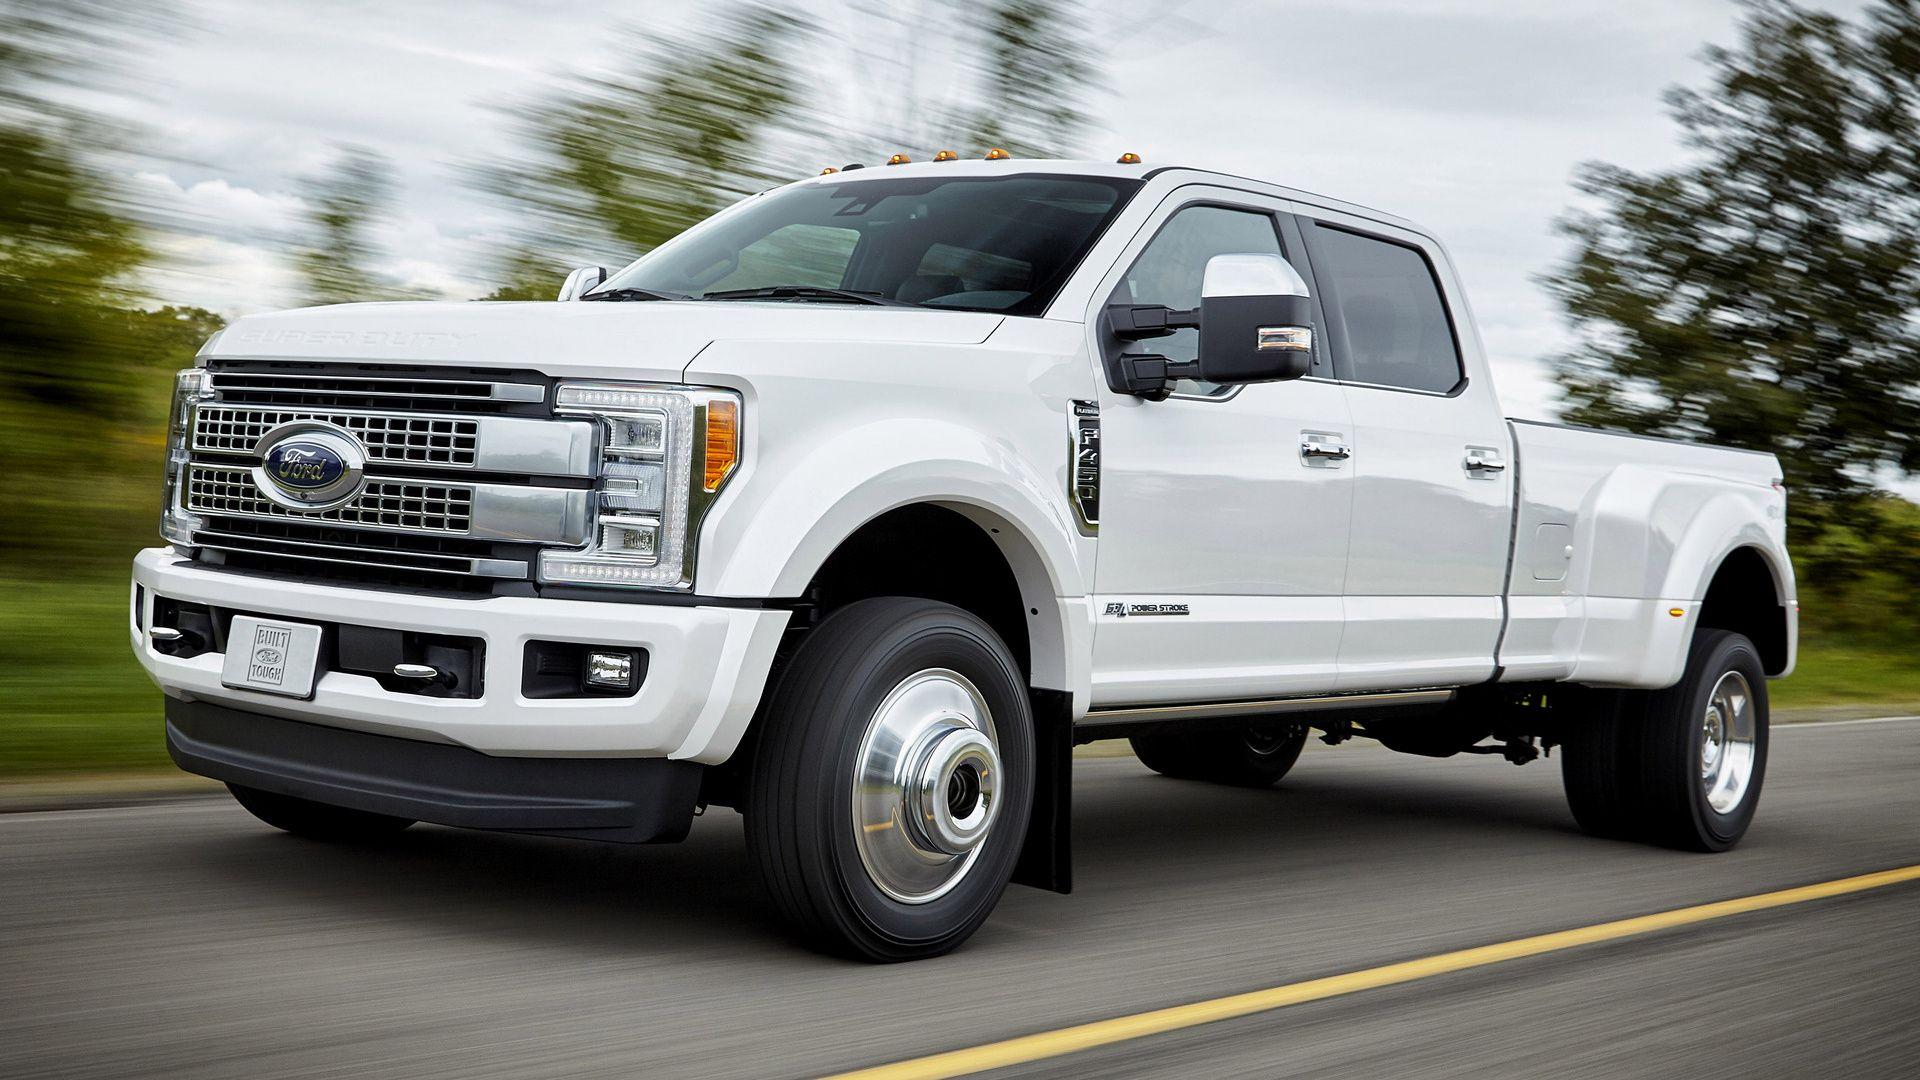 Ford F 250 Super Duty Wallpaper HD Photo, Wallpaper And Other